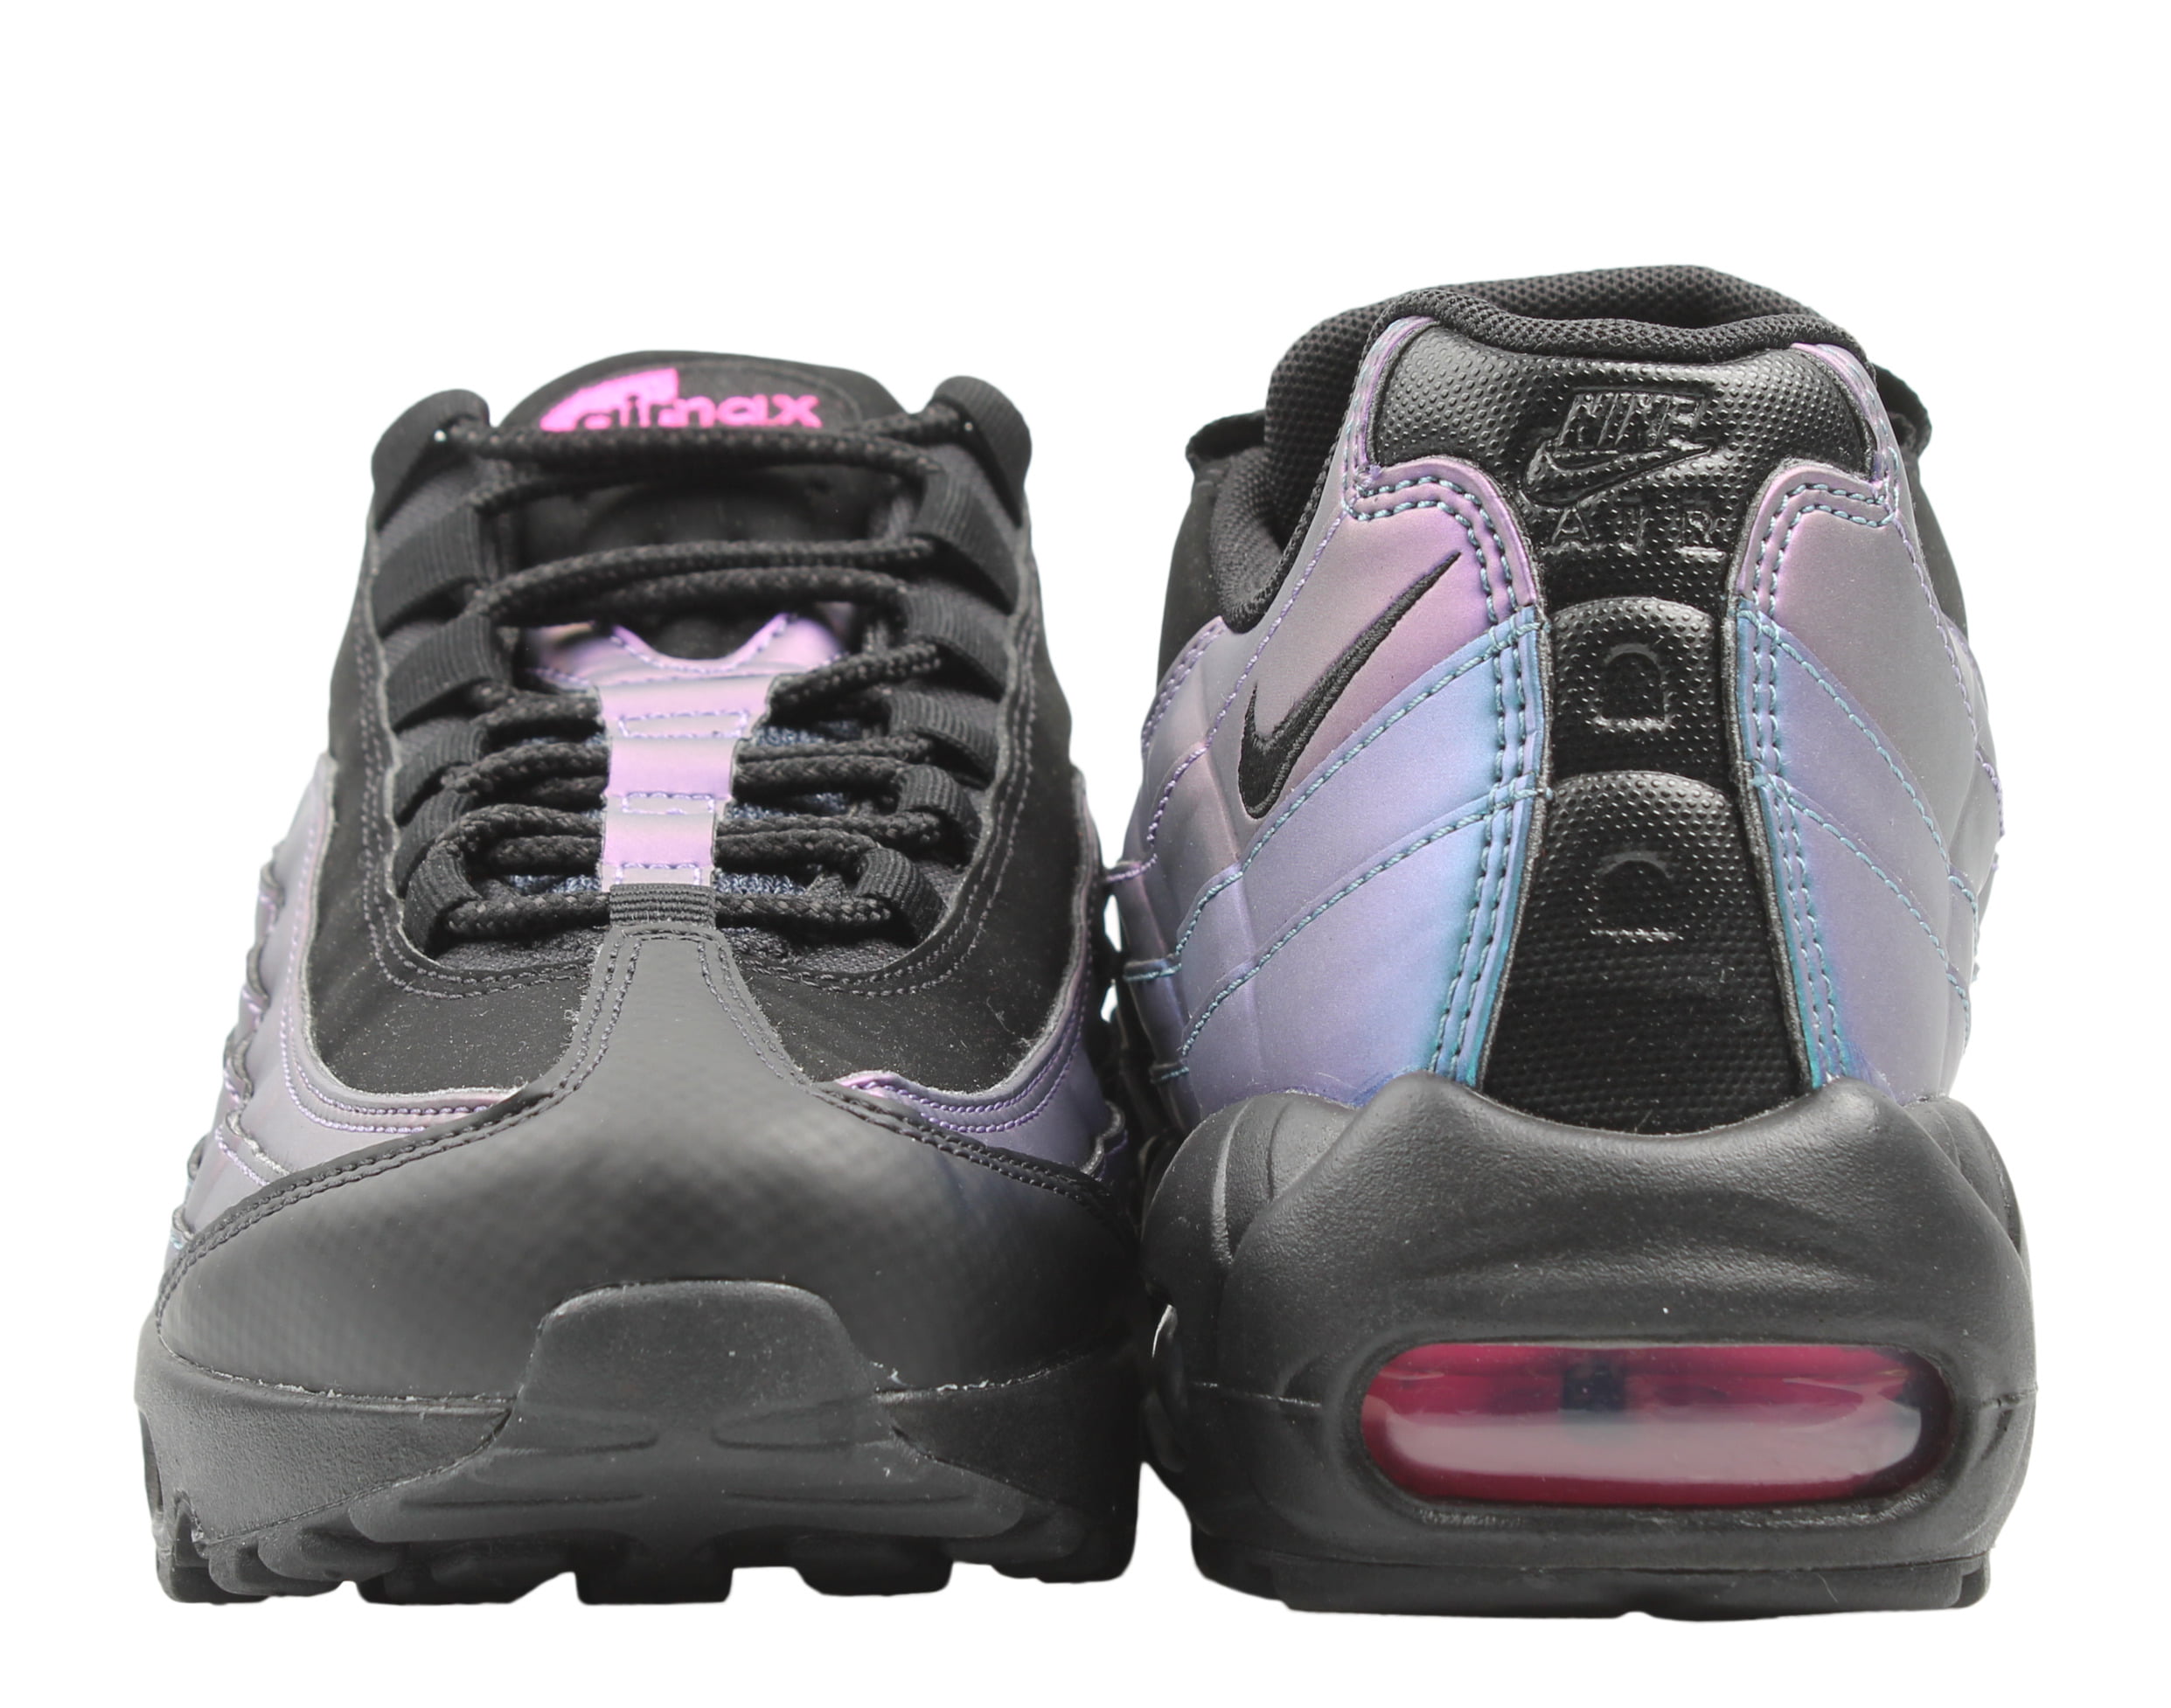 NIKE AIR MAX 95 PRM THROWBACK TO FUTURE for £130.00